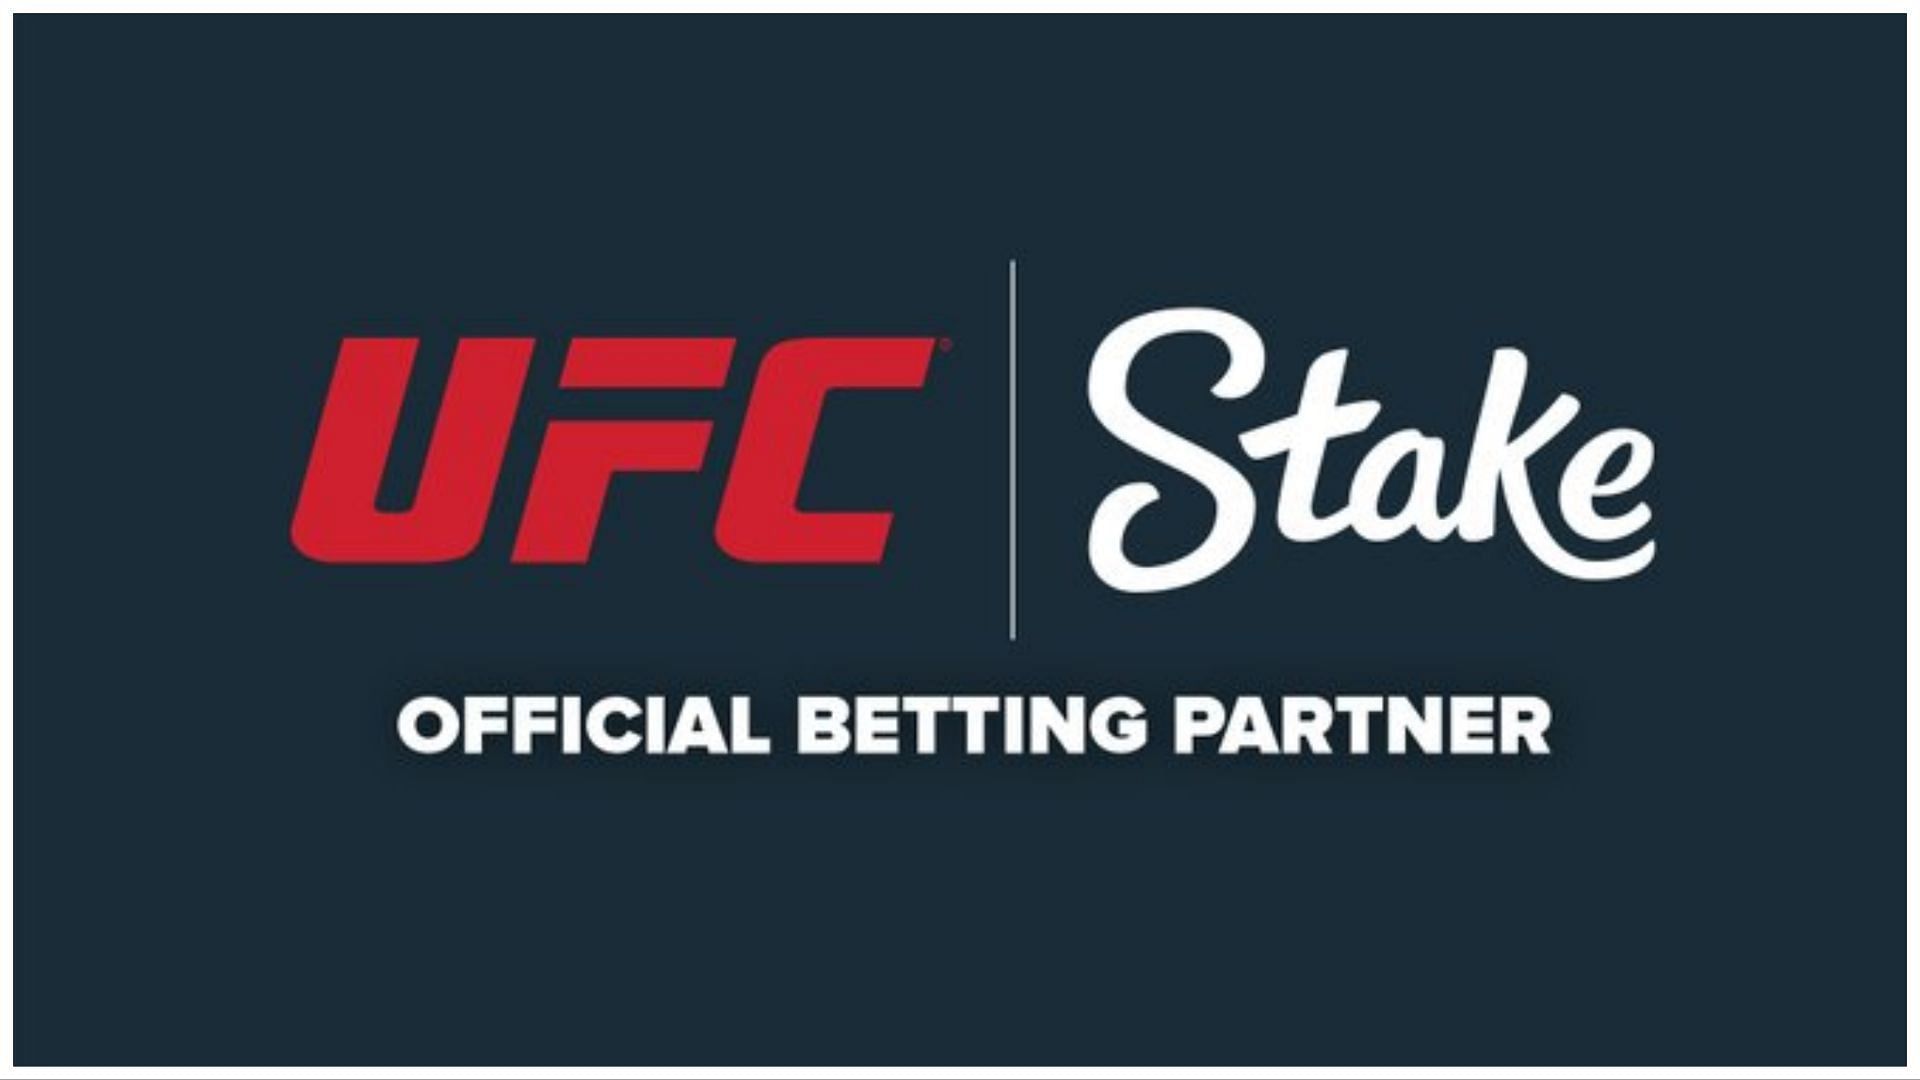 The official UFC Twitch account aired a fight where Stake.com was being advertised, despite Twitch